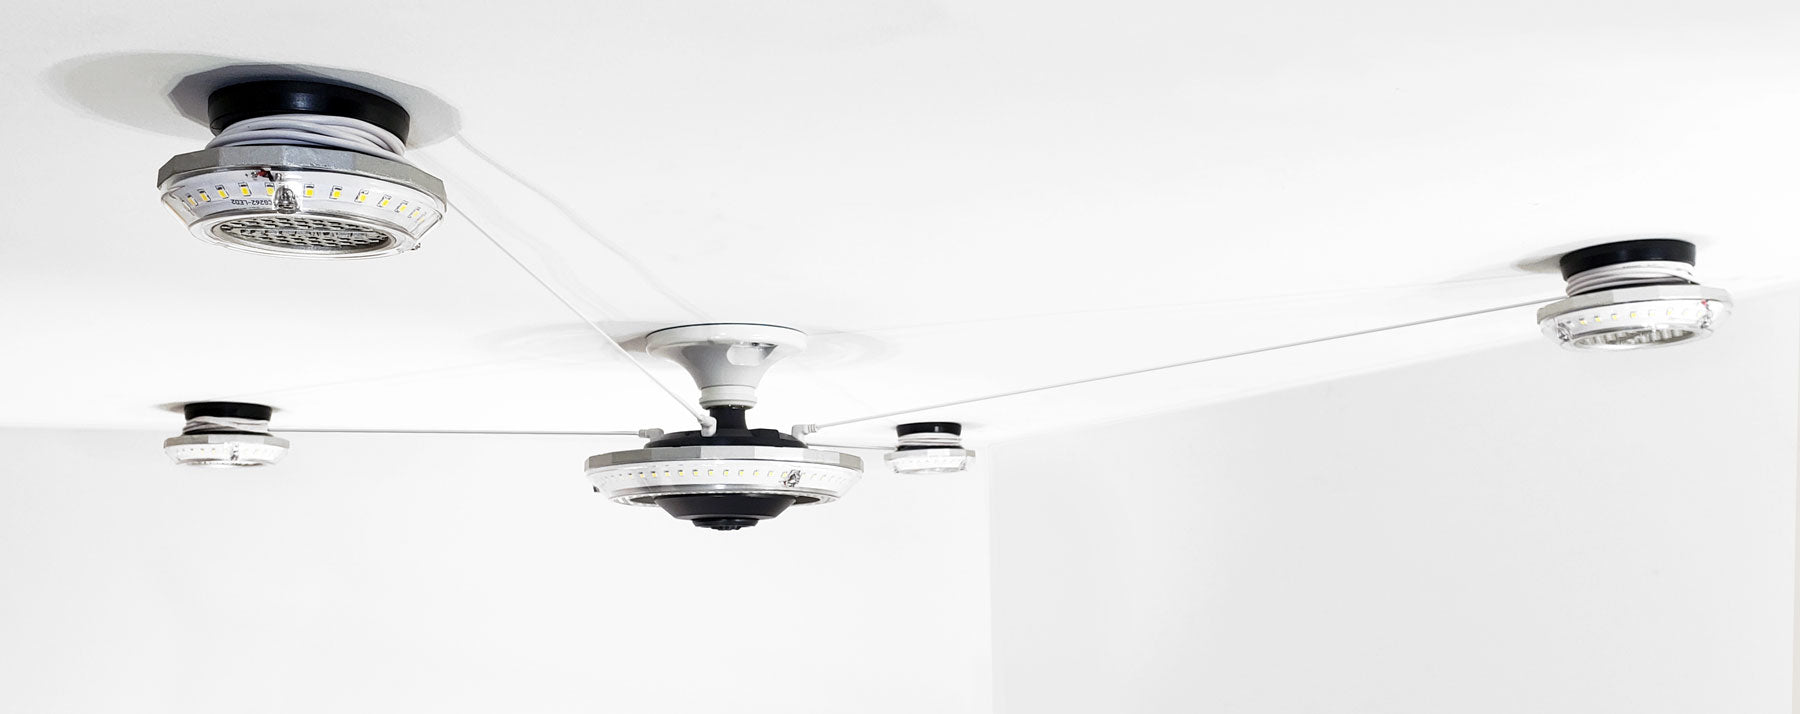 MPI Motion Activated Garage Ceiling Light - Multi LED Lights in one - Multi-Point Illumination cable management